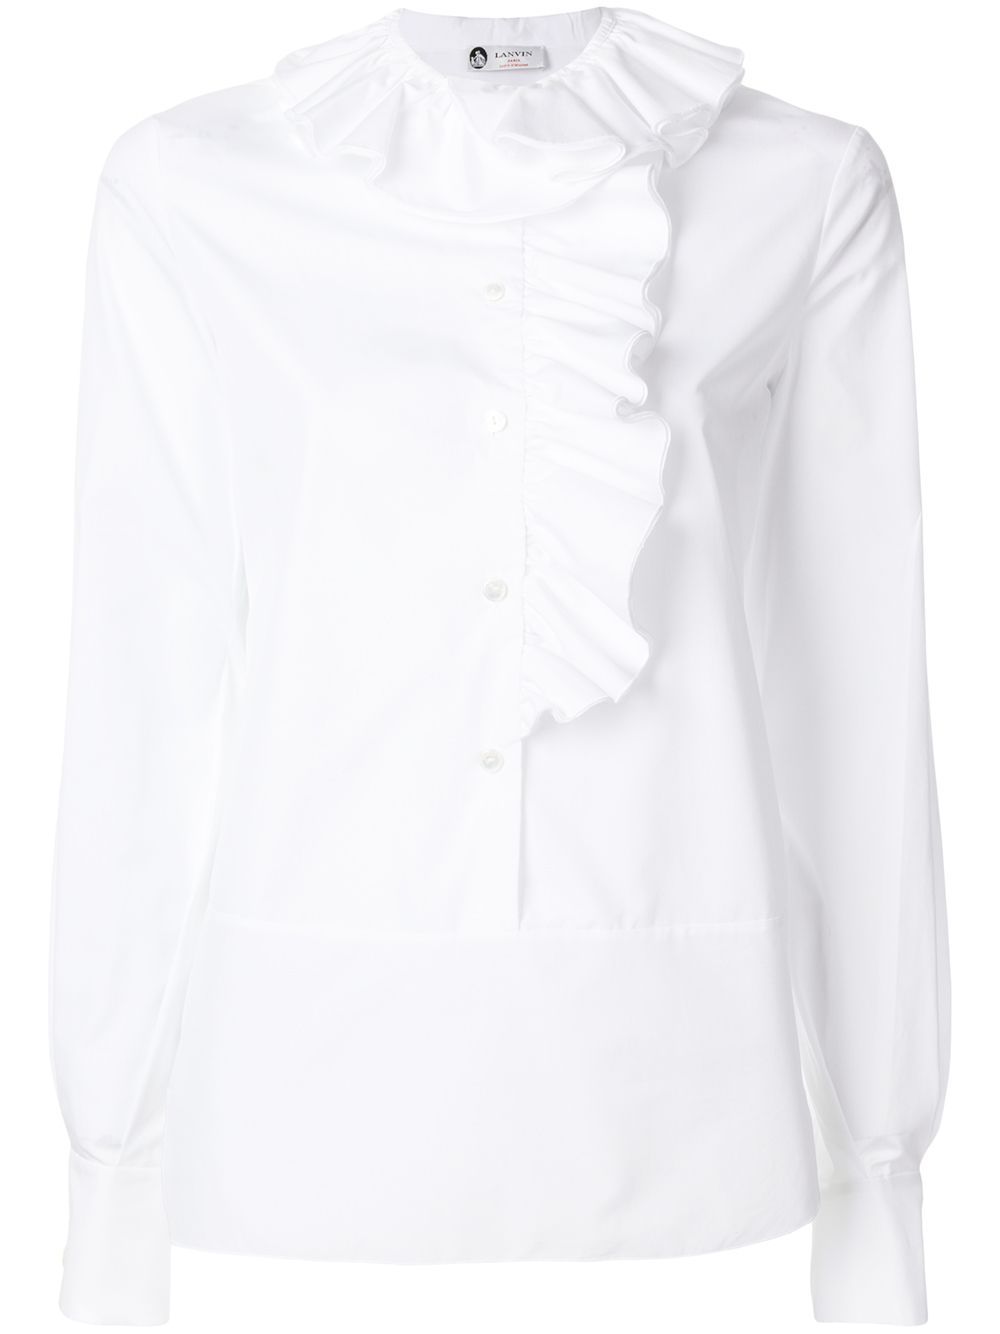 Lanvin shirt with frill detail - White | FarFetch US